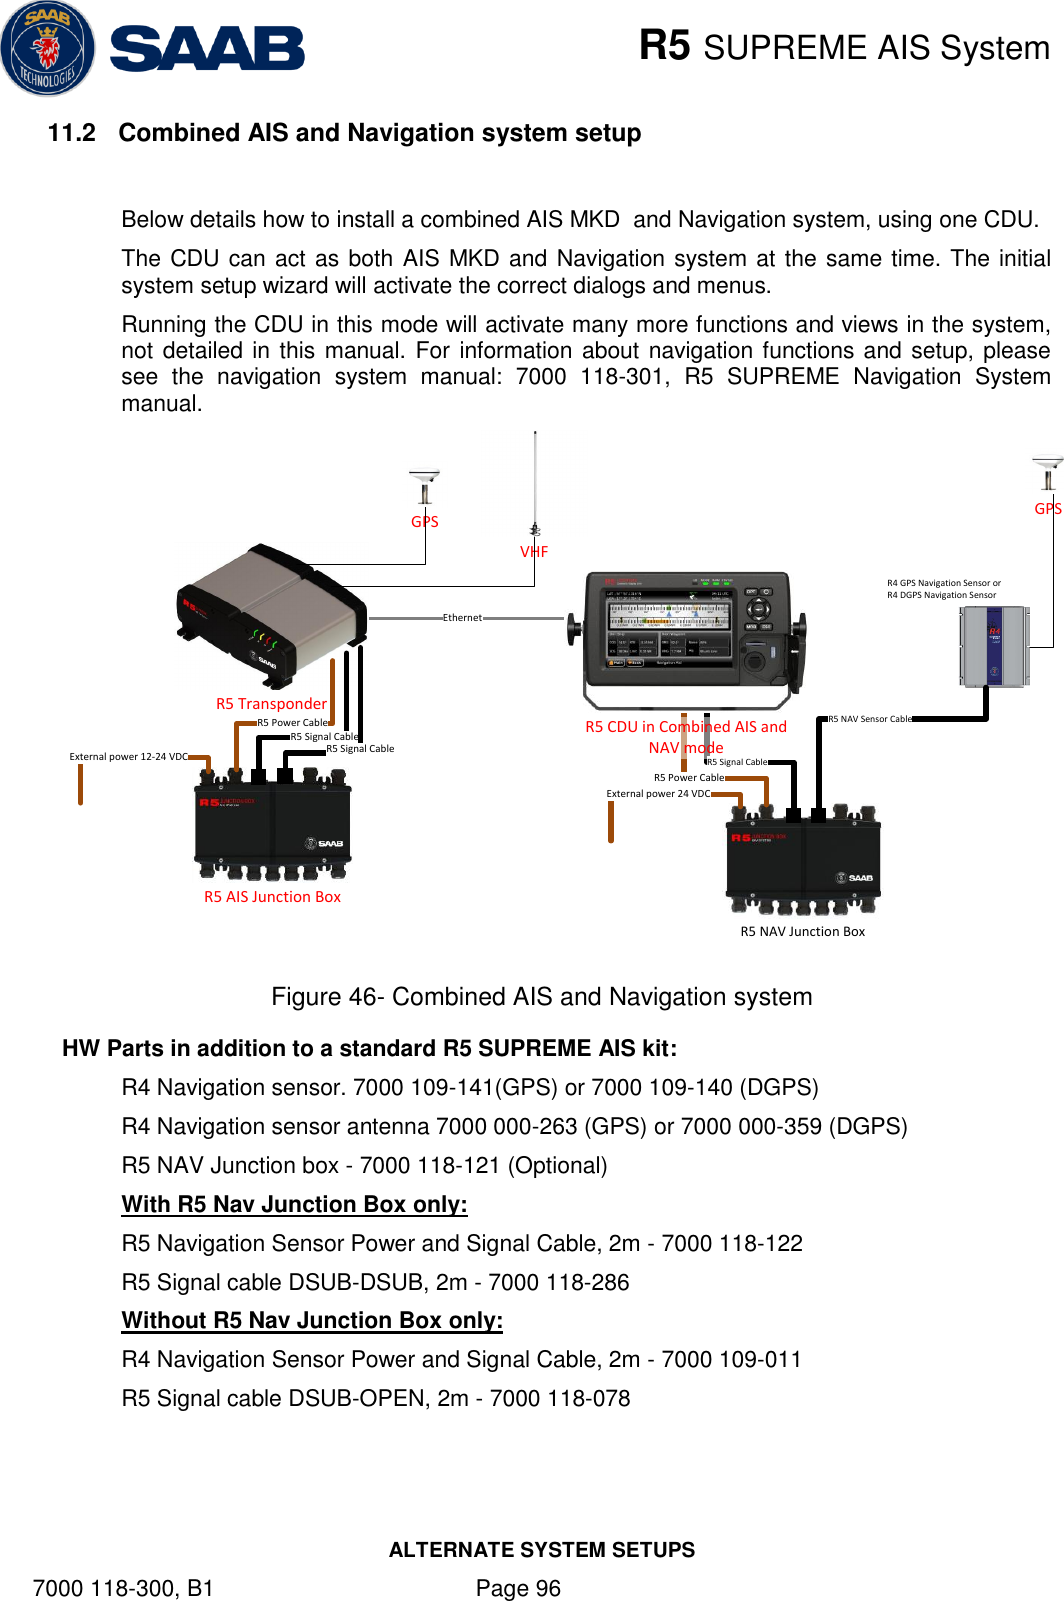    R5 SUPREME AIS System ALTERNATE SYSTEM SETUPS 7000 118-300, B1    Page 96 11.2  Combined AIS and Navigation system setup  Below details how to install a combined AIS MKD  and Navigation system, using one CDU.  The CDU can act as both AIS MKD and Navigation system at the same time. The initial system setup wizard will activate the correct dialogs and menus.  Running the CDU in this mode will activate many more functions and views in the system, not detailed in this manual. For information about navigation functions and setup, please see  the  navigation  system  manual:  7000  118-301,  R5  SUPREME  Navigation  System manual. R4 GPS Navigation Sensor orR4 DGPS Navigation SensorR5 NAV Junction BoxR5 NAV Junction BoxR5 NAV Sensor CableExternal power 24 VDCR5 Signal CableR5 Power CableR5 AIS Junction BoxEthernetExternal power 12-24 VDCR5 Transponder                  R5 Signal CableR5 Signal CableR5 Power CableVHFGPS GPSR5 CDU in Combined AIS and NAV mode Figure 46- Combined AIS and Navigation system HW Parts in addition to a standard R5 SUPREME AIS kit: R4 Navigation sensor. 7000 109-141(GPS) or 7000 109-140 (DGPS) R4 Navigation sensor antenna 7000 000-263 (GPS) or 7000 000-359 (DGPS) R5 NAV Junction box - 7000 118-121 (Optional) With R5 Nav Junction Box only: R5 Navigation Sensor Power and Signal Cable, 2m - 7000 118-122 R5 Signal cable DSUB-DSUB, 2m - 7000 118-286 Without R5 Nav Junction Box only: R4 Navigation Sensor Power and Signal Cable, 2m - 7000 109-011 R5 Signal cable DSUB-OPEN, 2m - 7000 118-078  